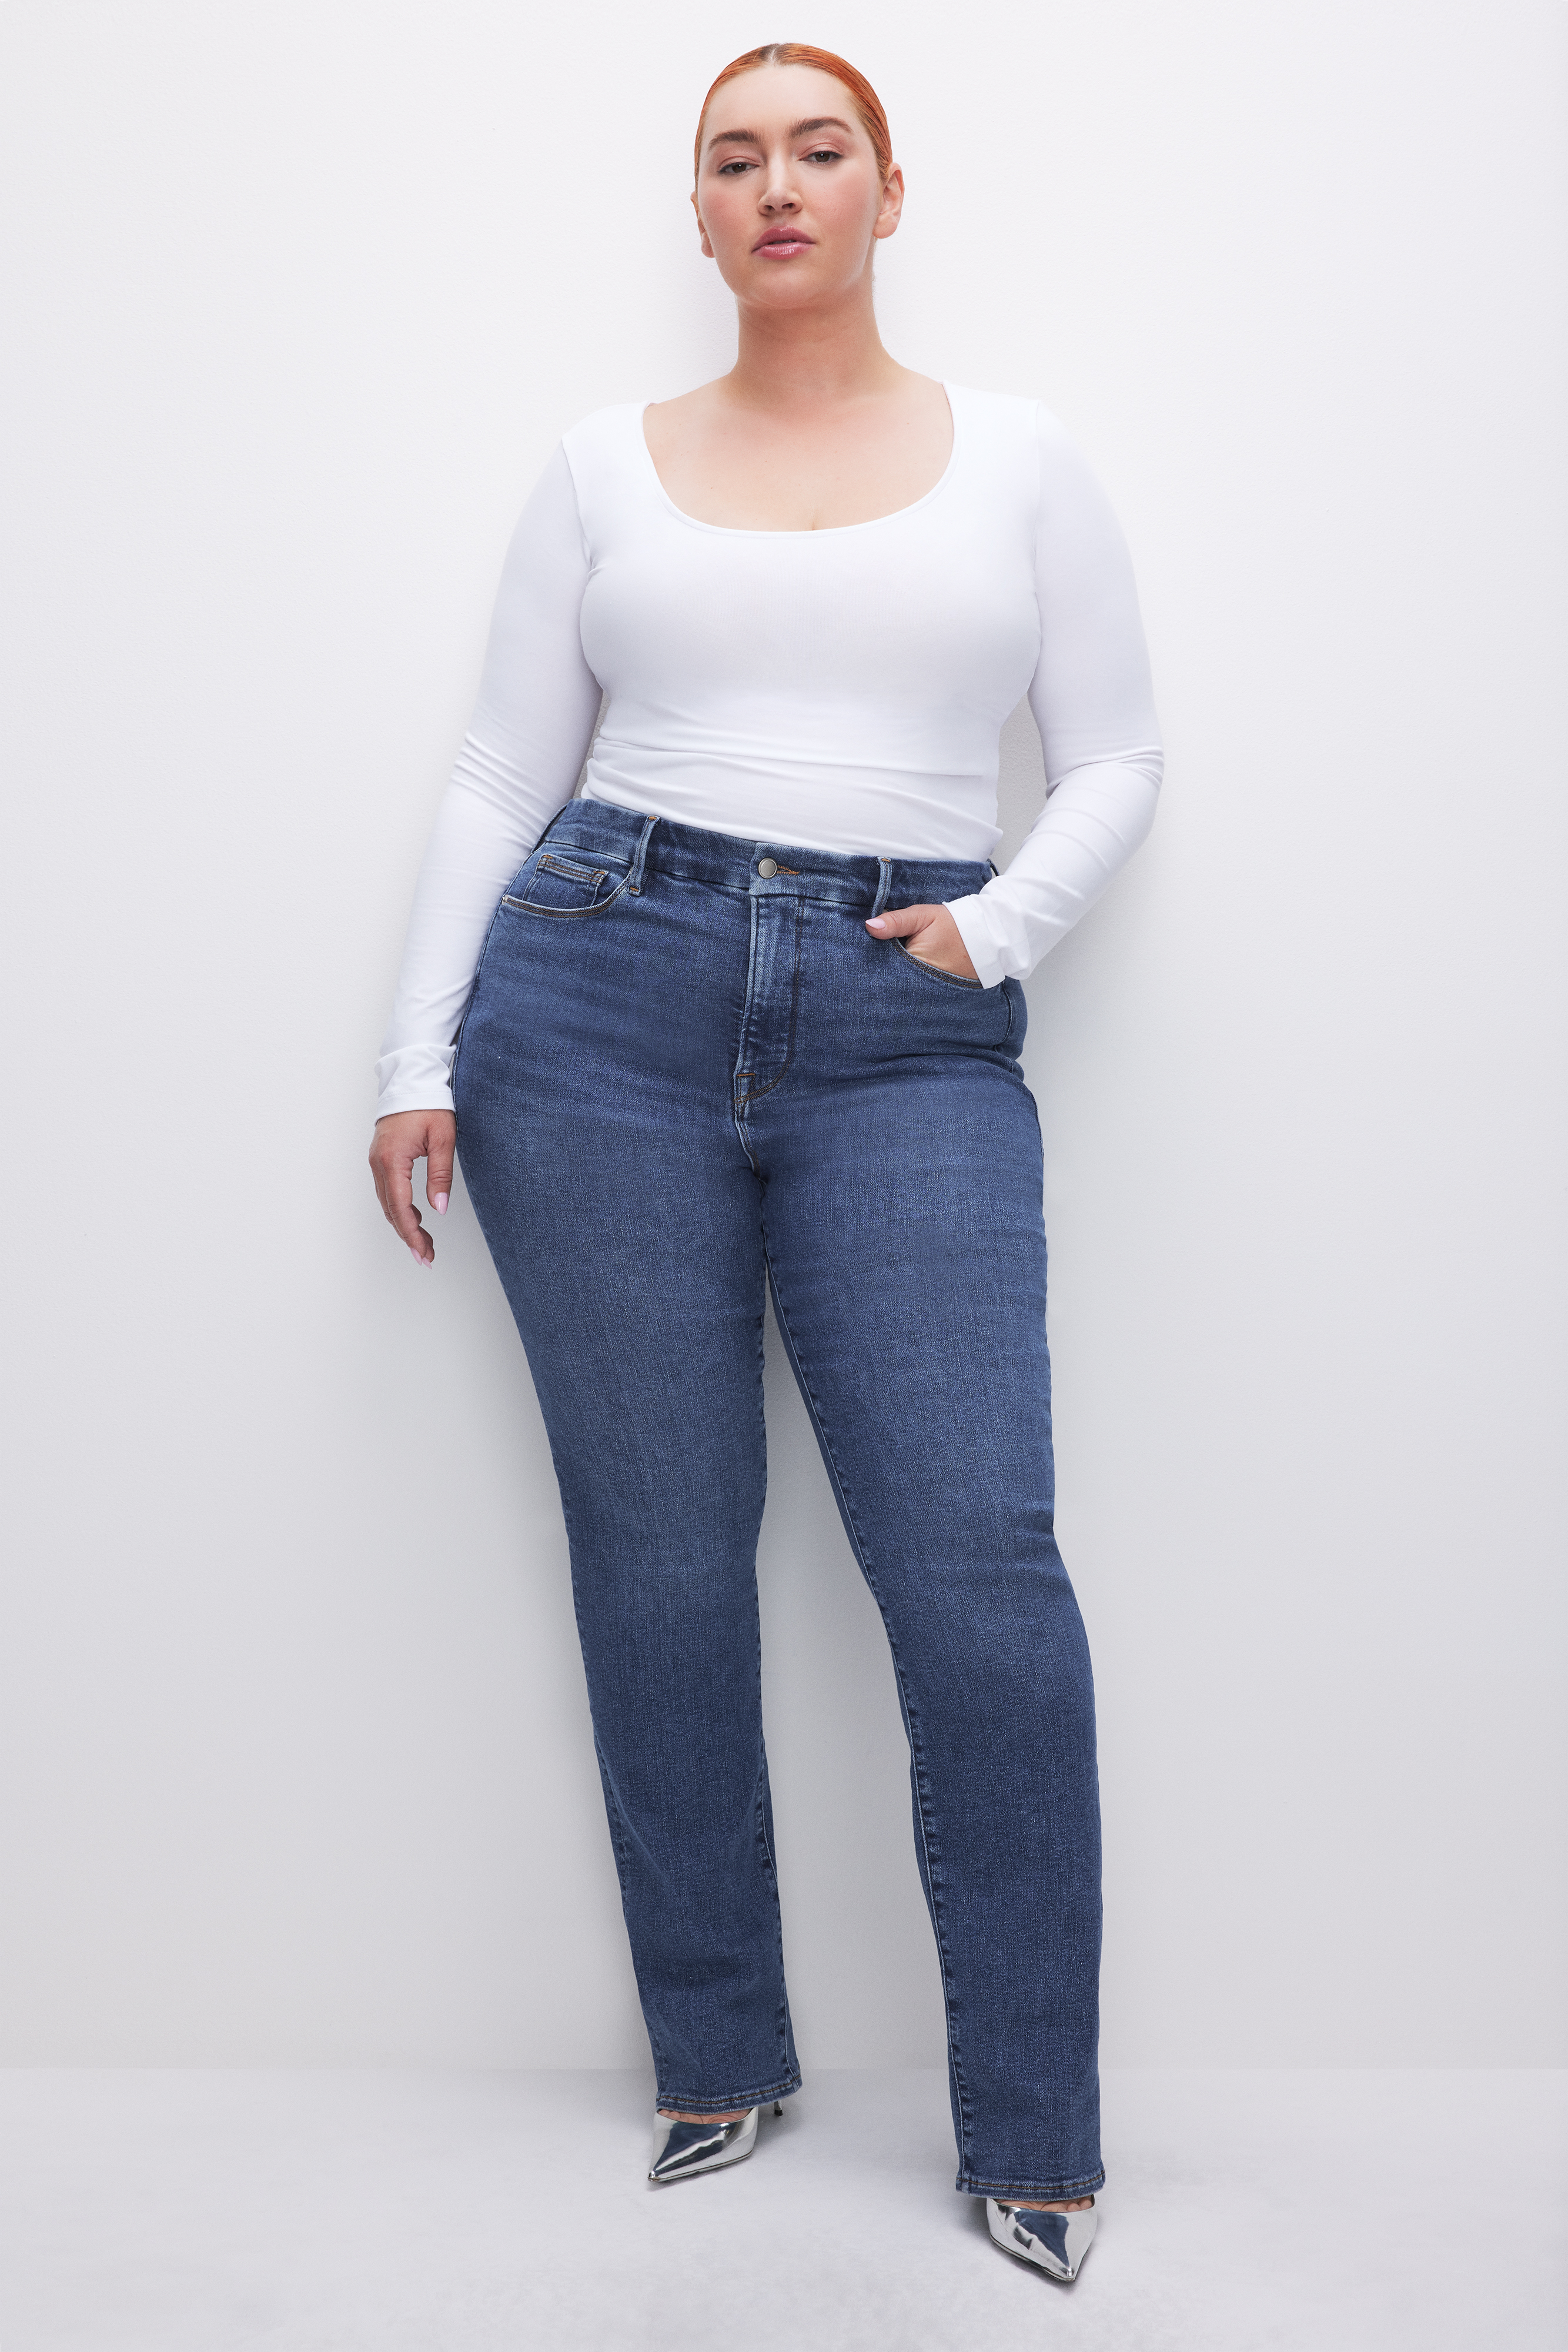 Styled with GOOD CLASSIC SLIM STRAIGHT JEANS | INDIGO582